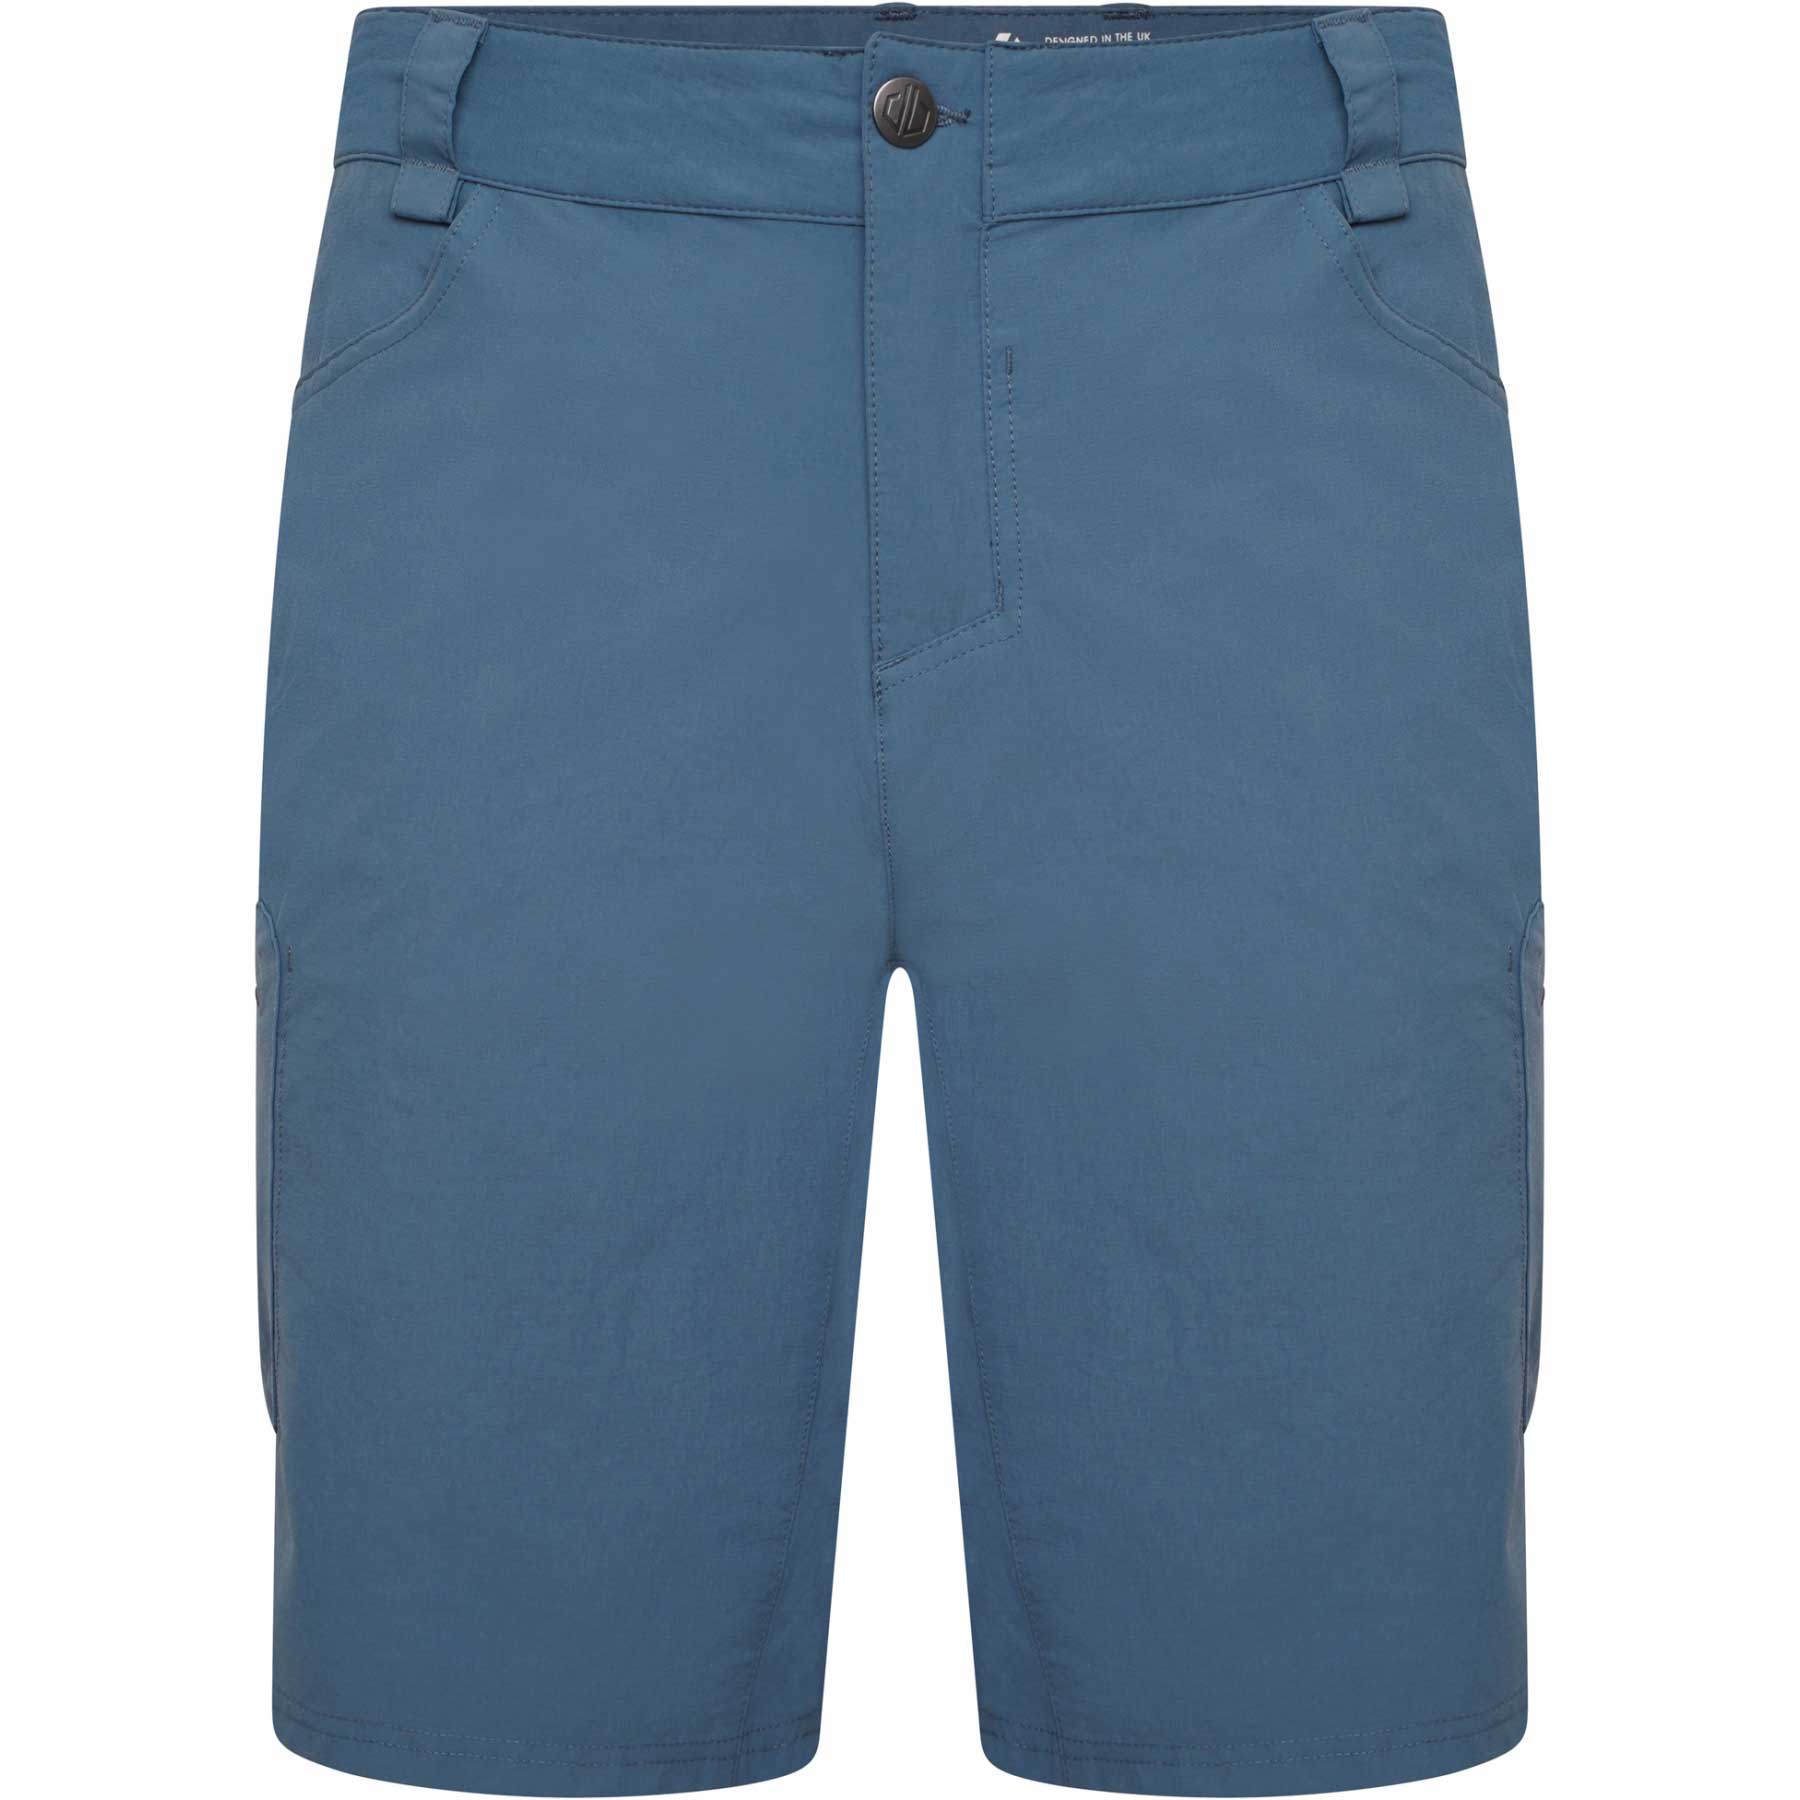 Picture of Dare 2b Tuned In II Shorts Men - Q1Q Orion Grey